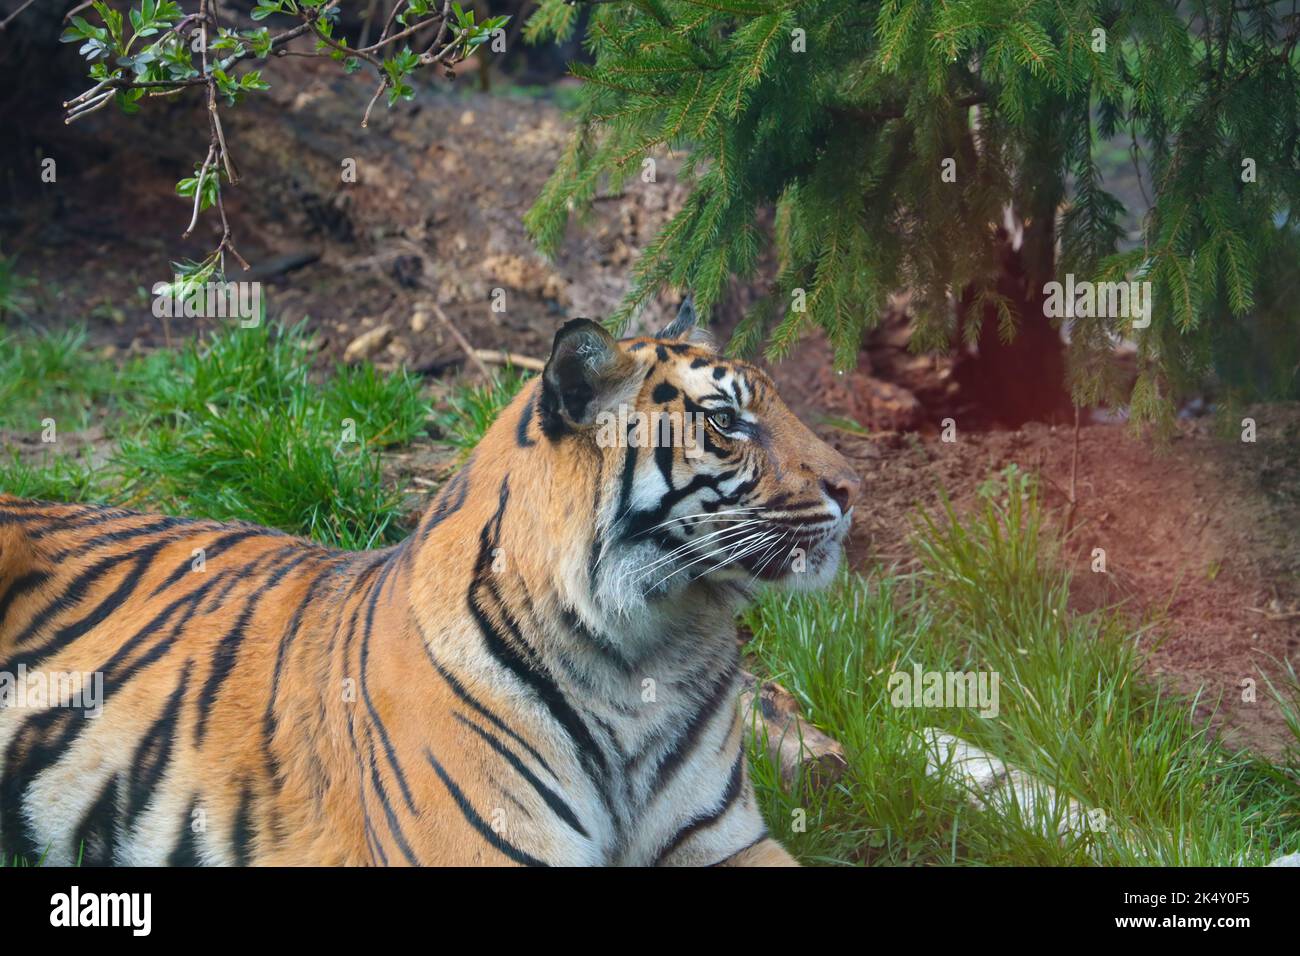 A Close-up of a tiger lying on the ground Stock Photo